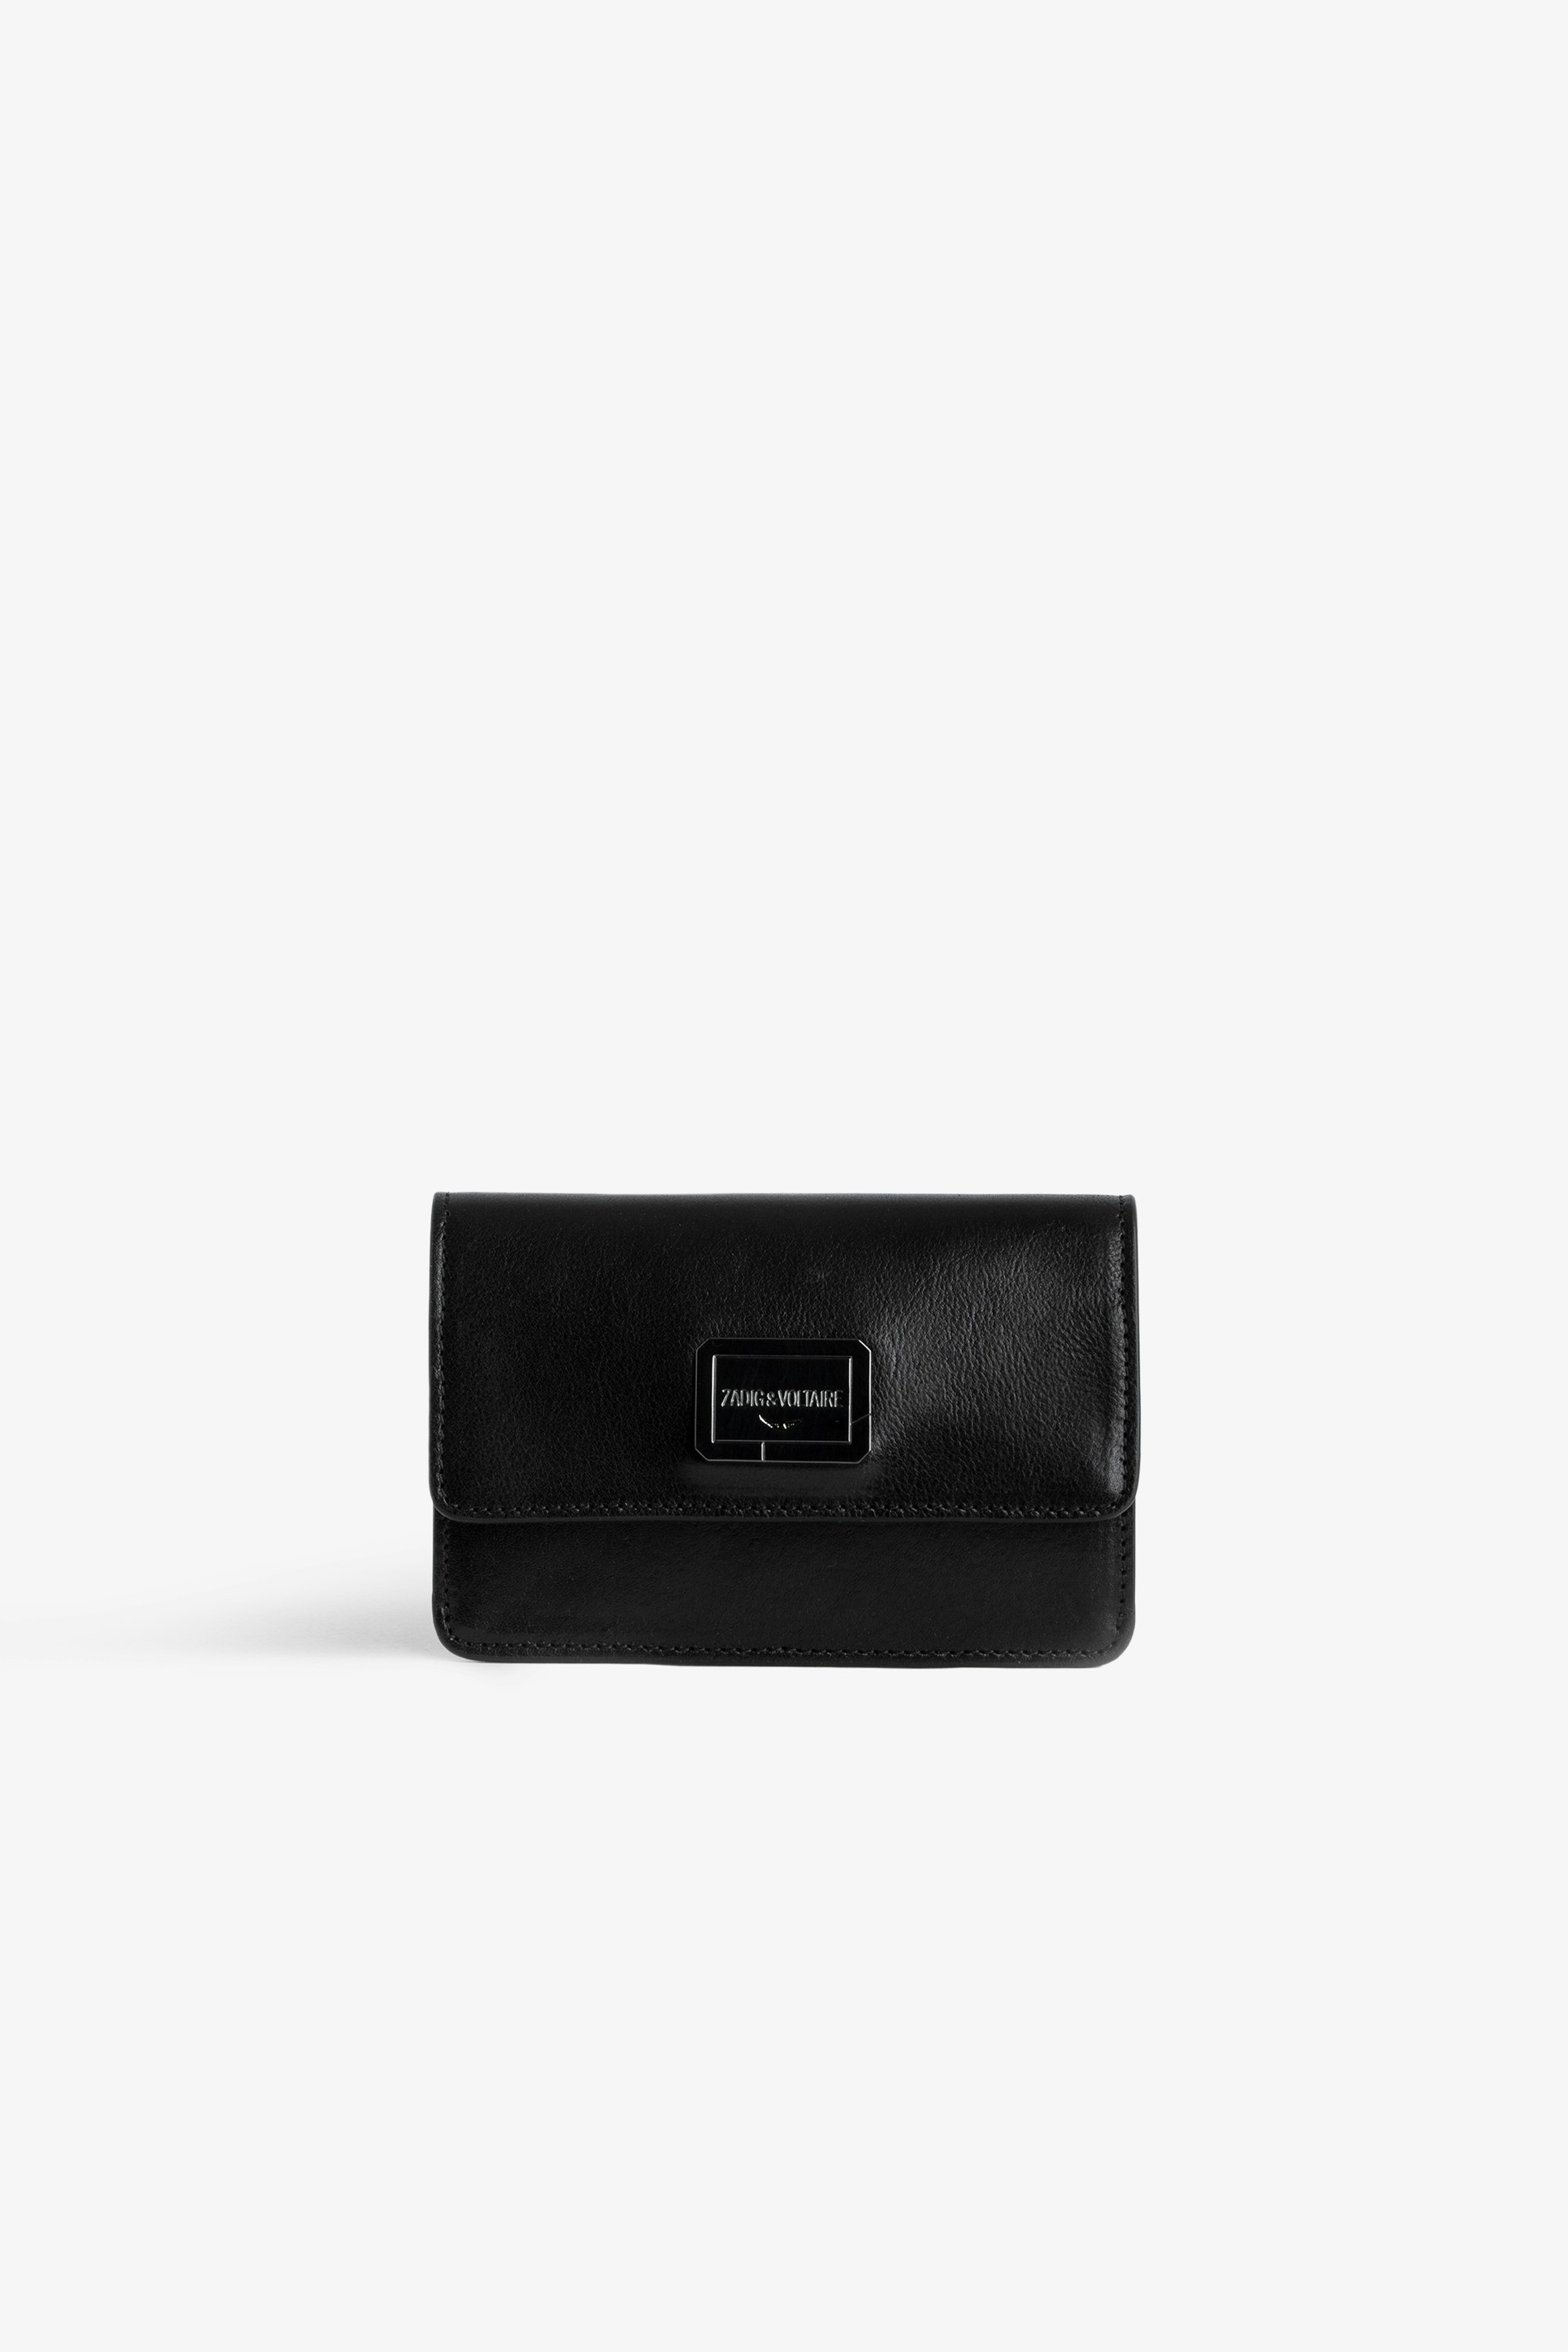 Le Cecilia Wallet - Women's black leather wallet with flap